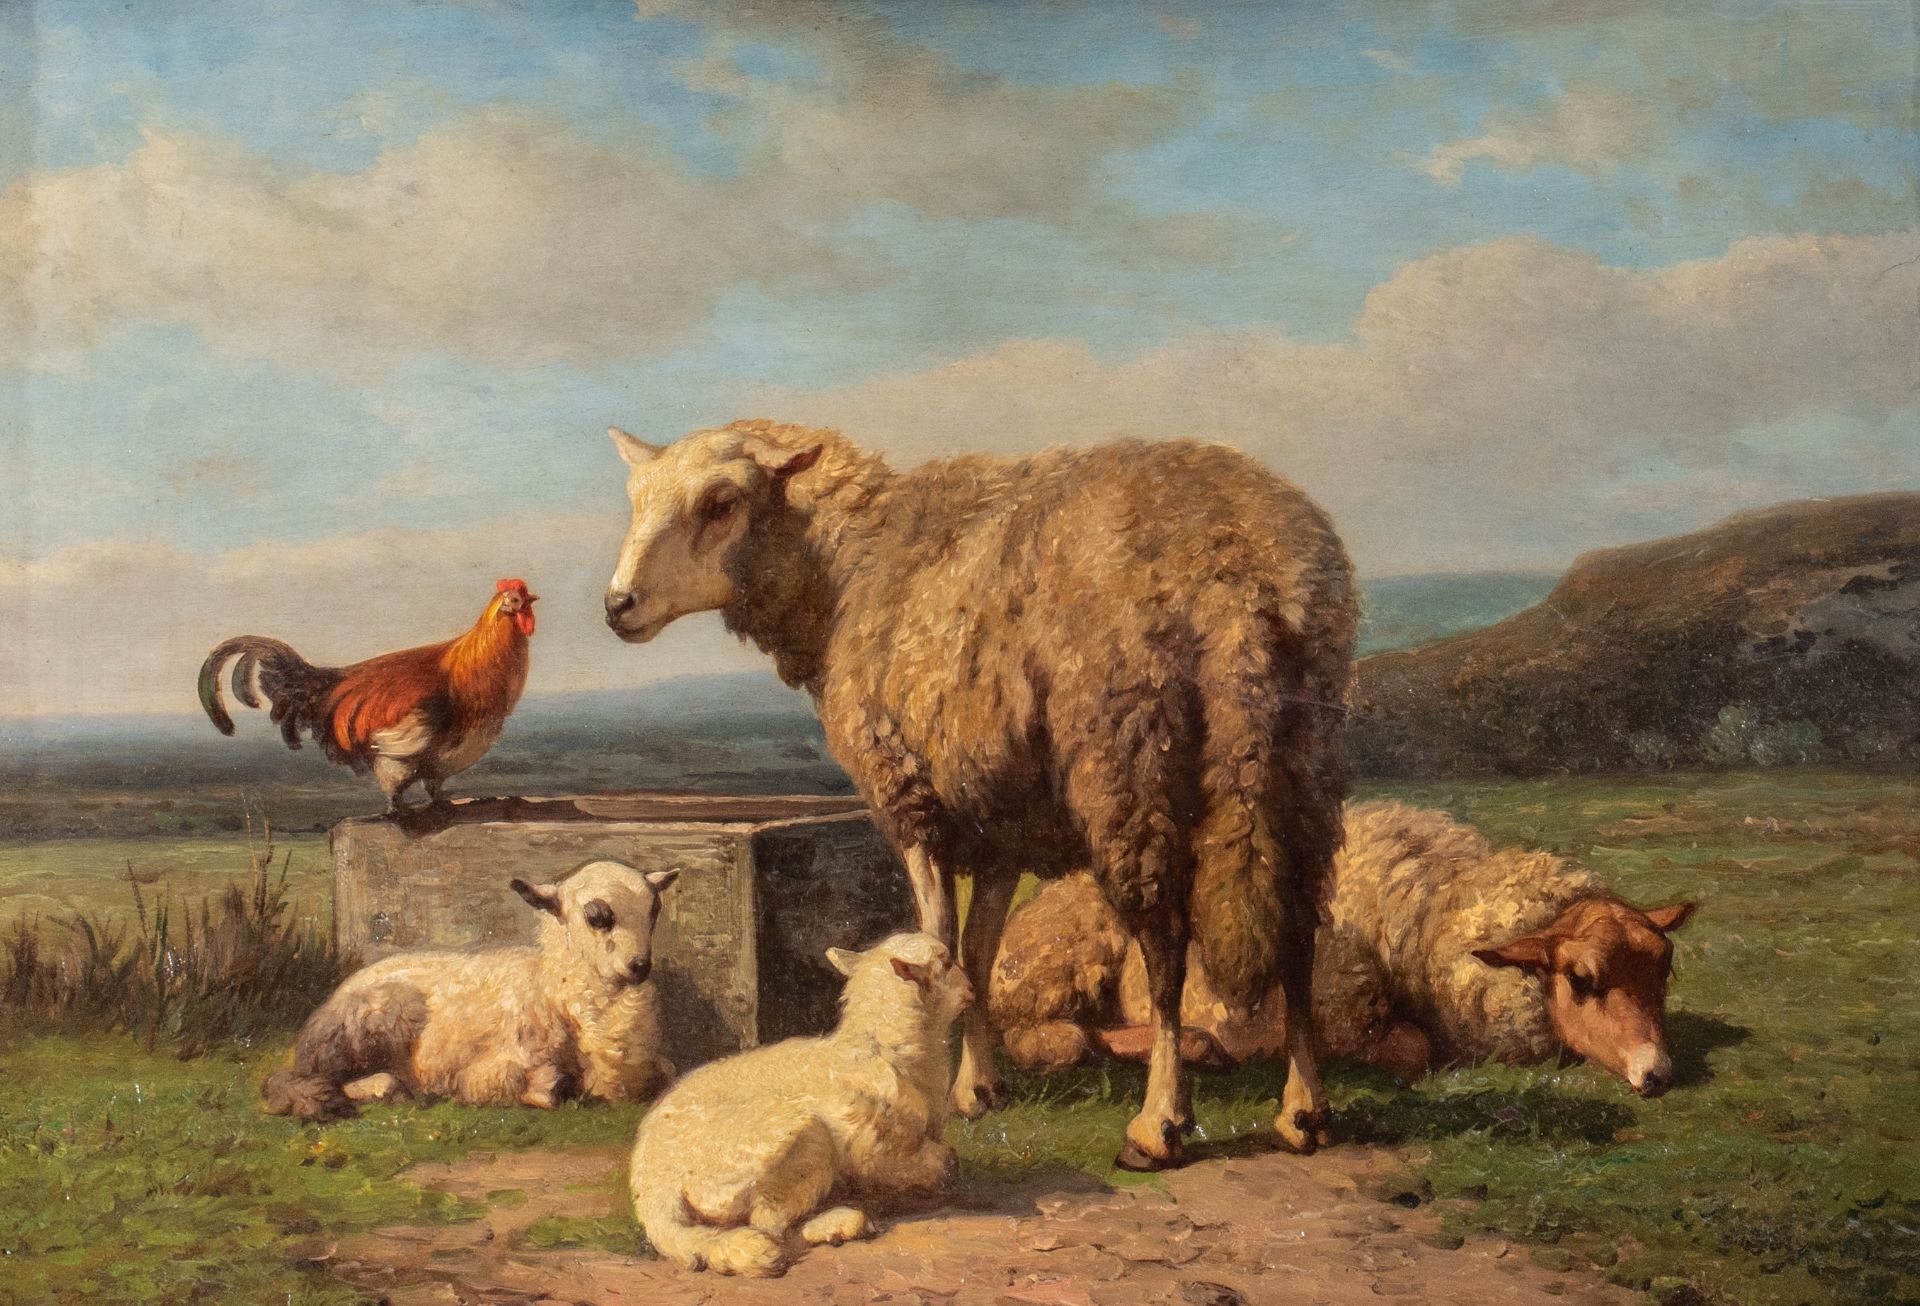 Louis Robbe (1806-1887), sheep and a rooster in a landscape, oil on panel, 30 x 43 cm